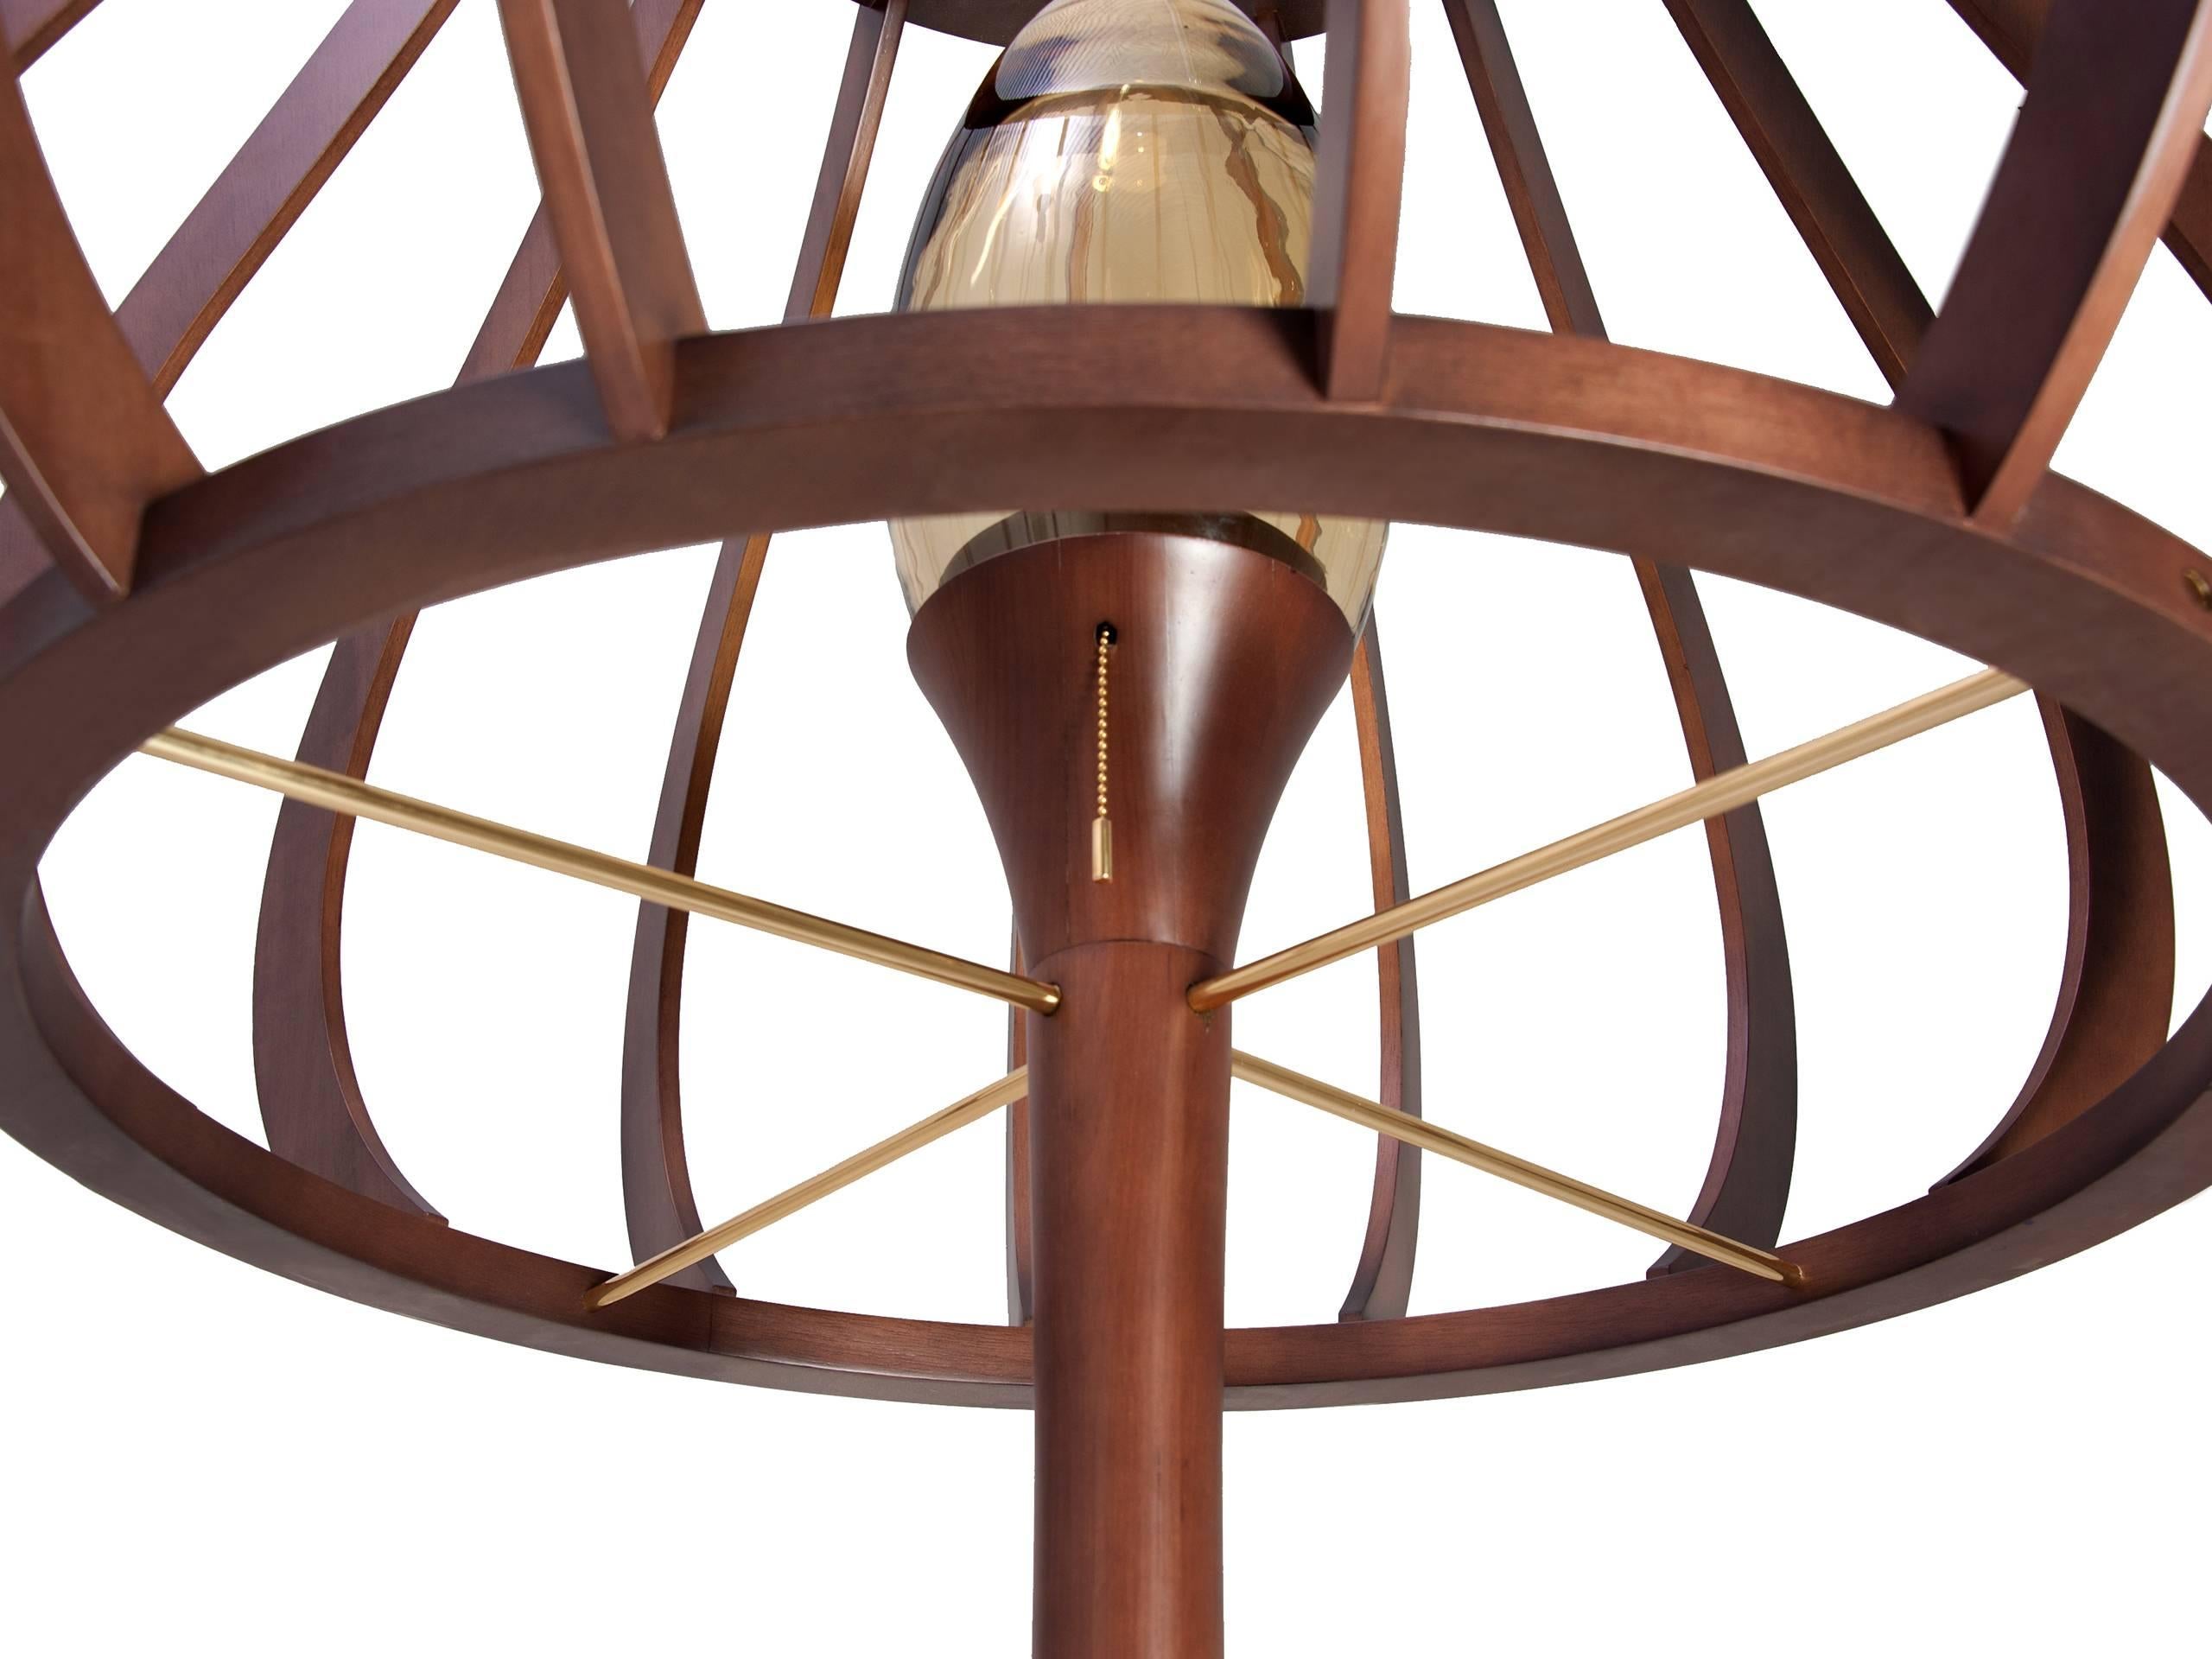 This is a proposition of lamp with wood turned base and lamp shade also made of wood.